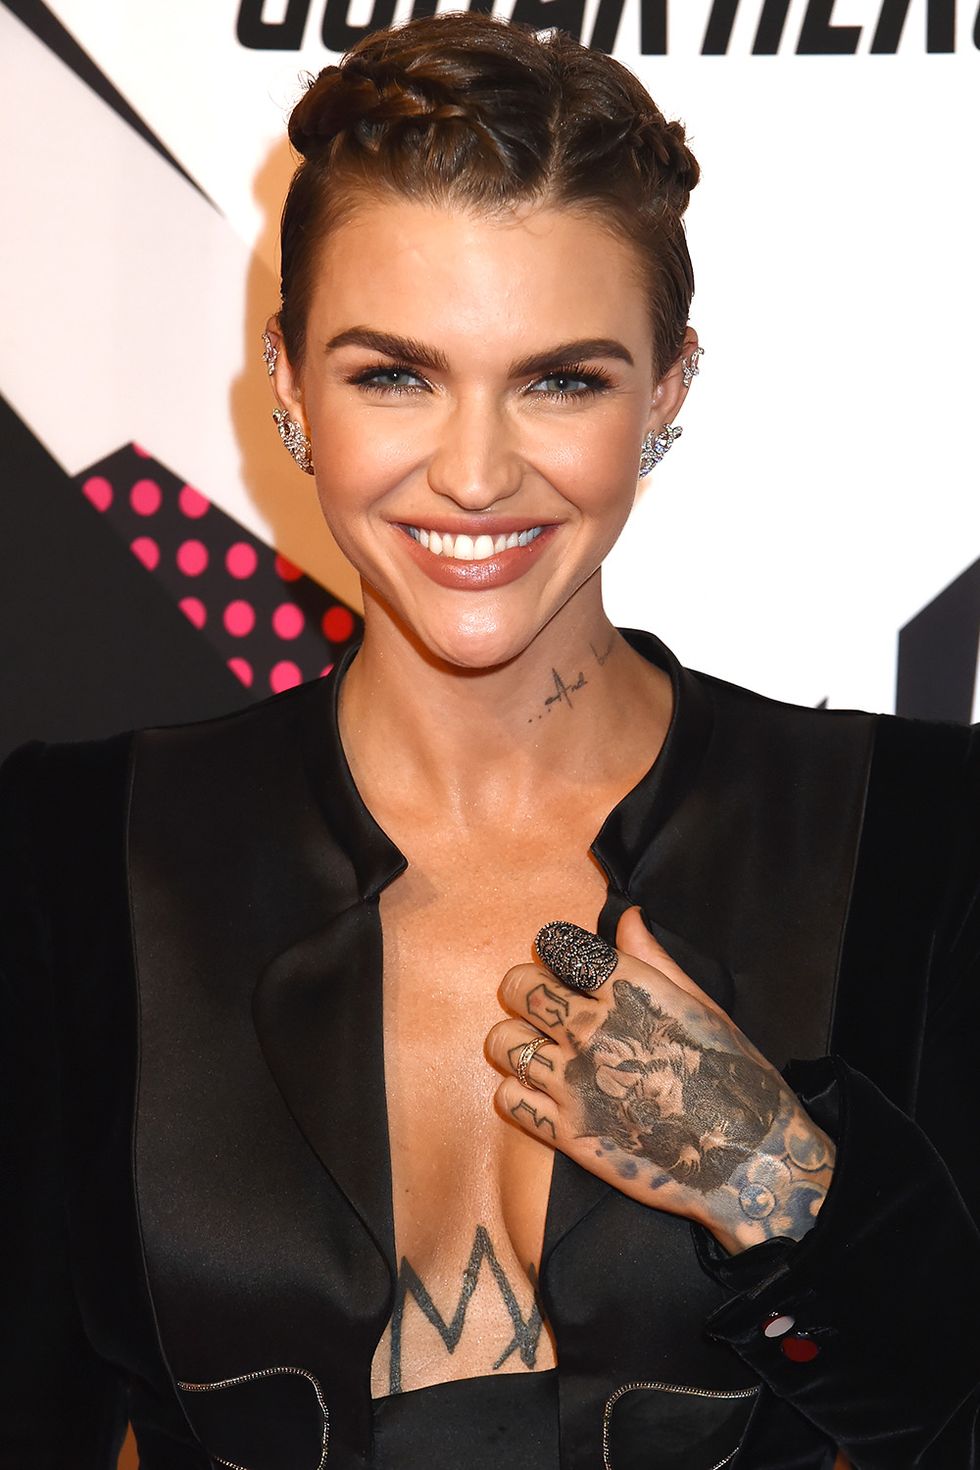 <p>Those tattoos, that smile, the most perfect pixie cut of all time...the <a href="http://www.elle.com/life-love/news/a28912/oitnb-ruby-rose-gender-fluidity-video/" target="_blank">gender fluid</a> DJ/actress had just about everyone falling for her approximately .05 seconds into her <em>OITNB</em> debut.</p>